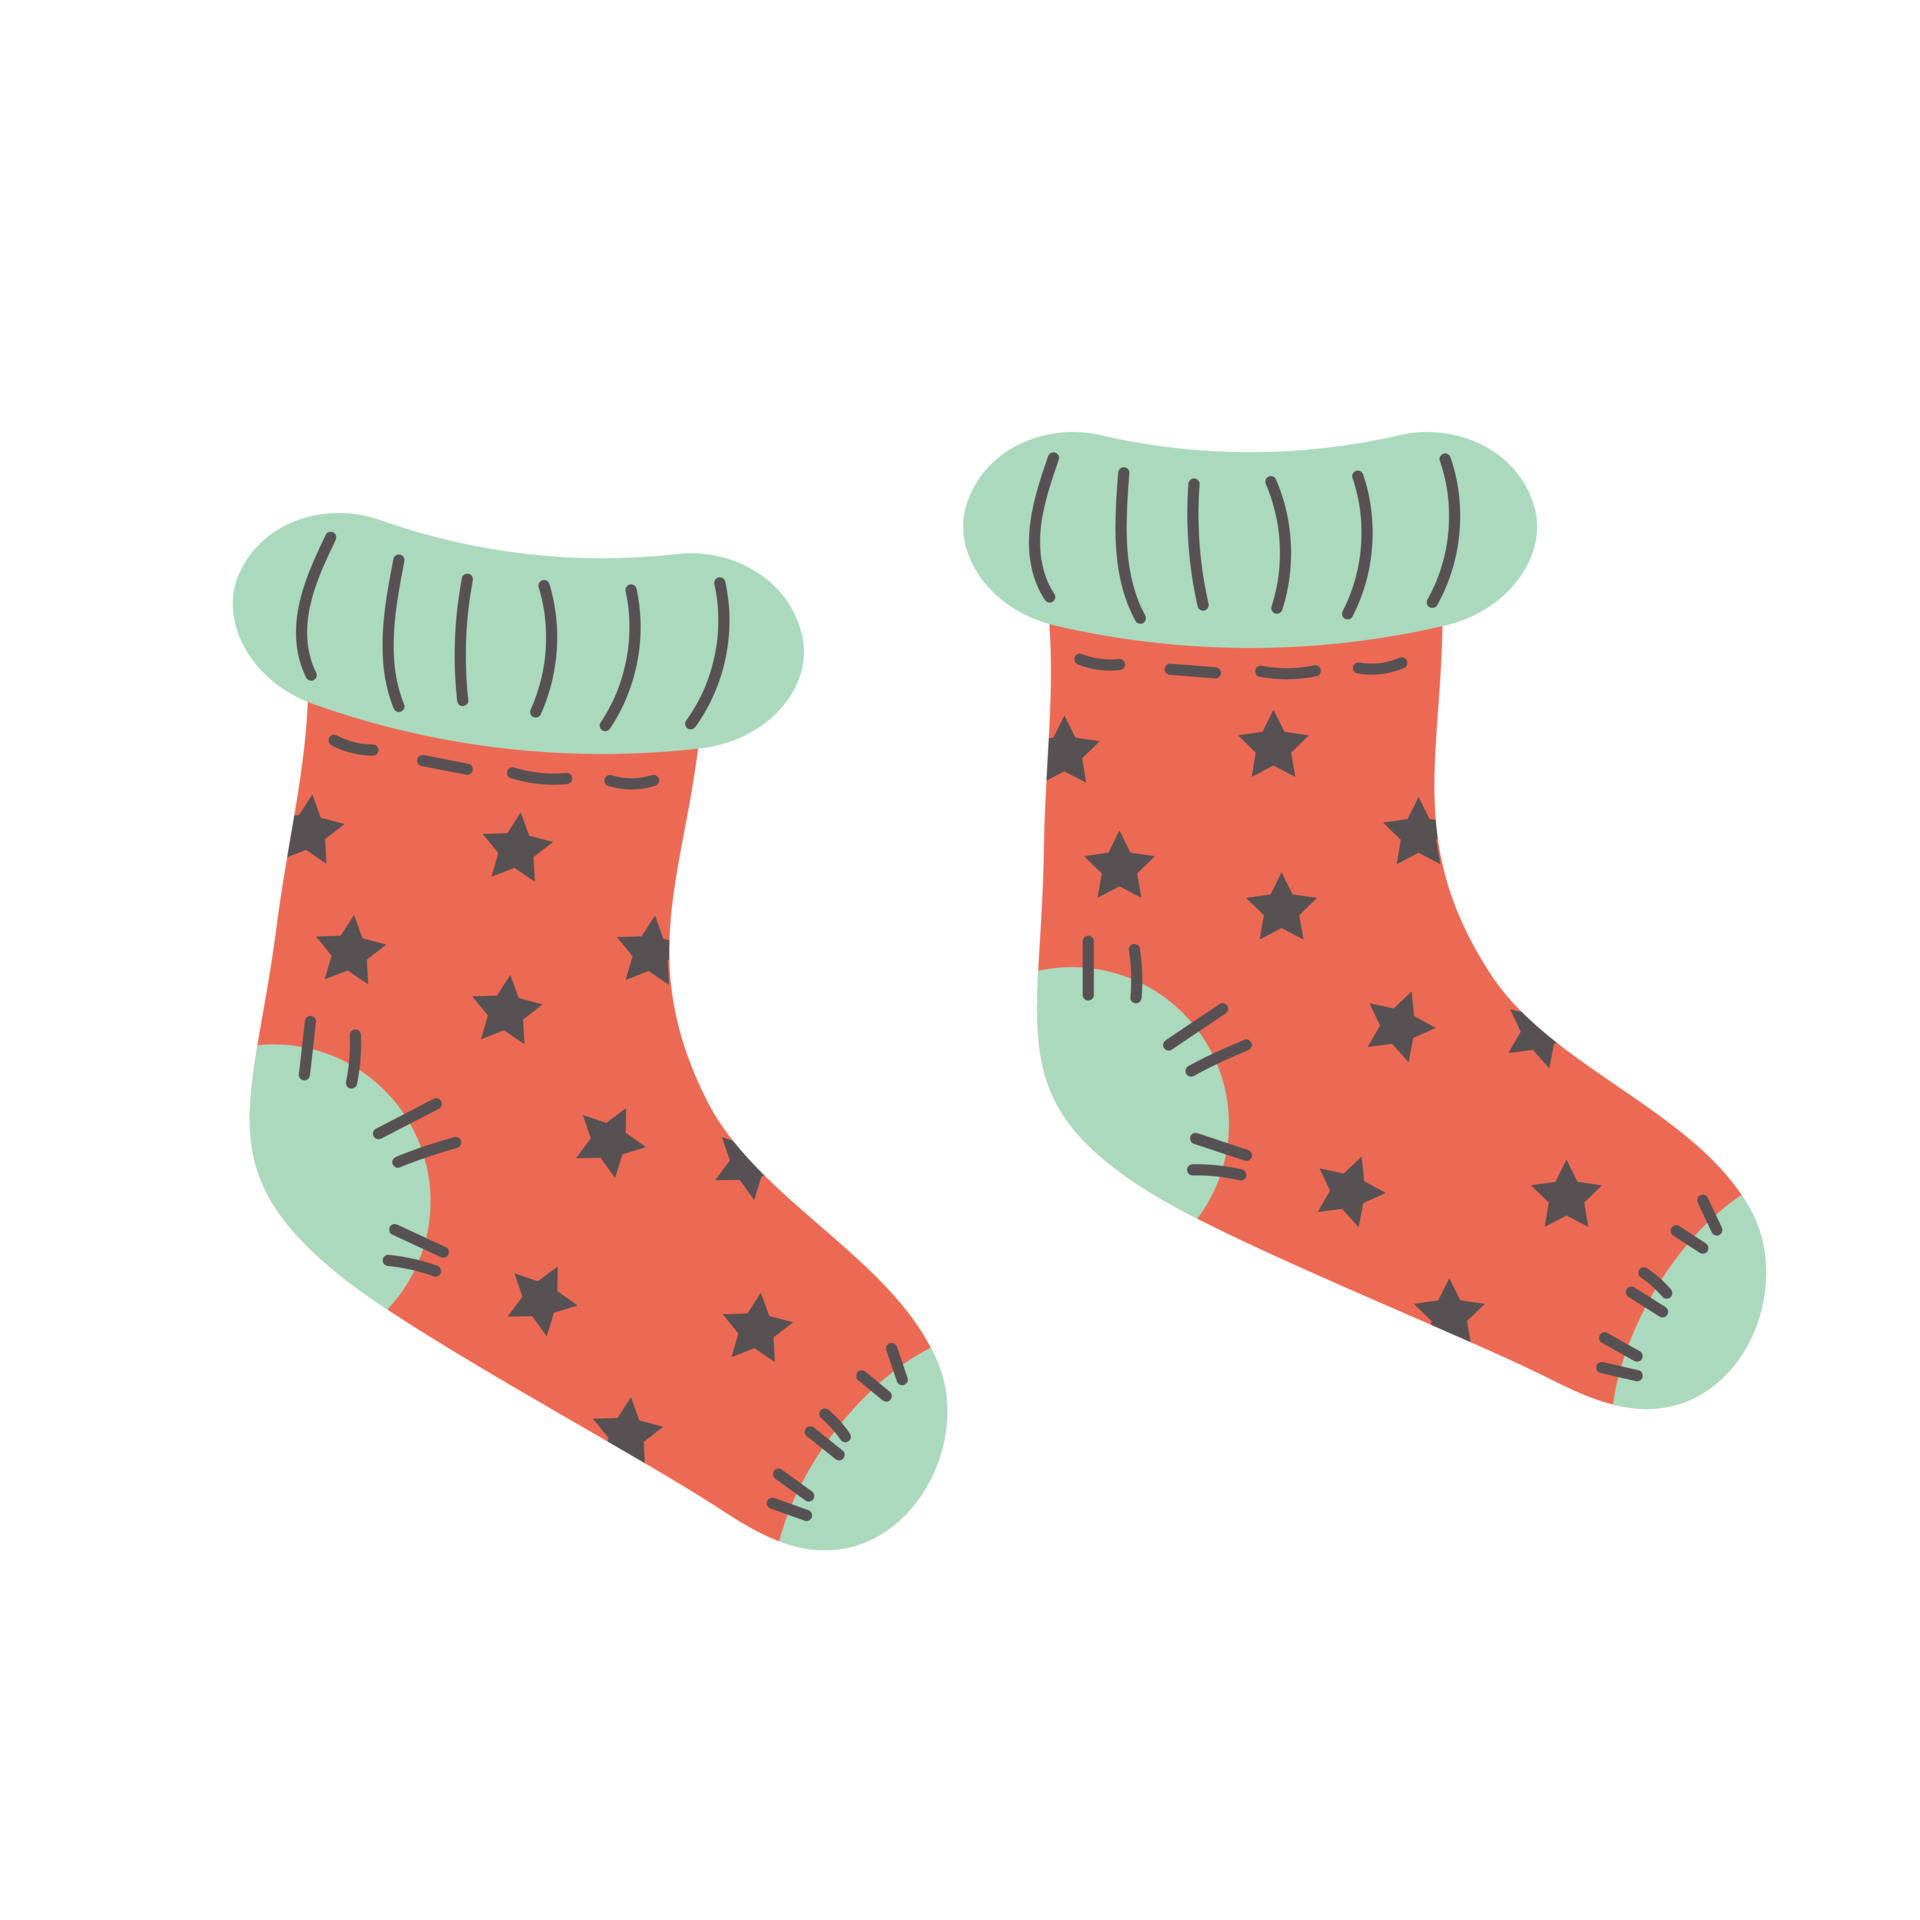 Colorful warm socks with cute pattern. Christmas socks for gift ...